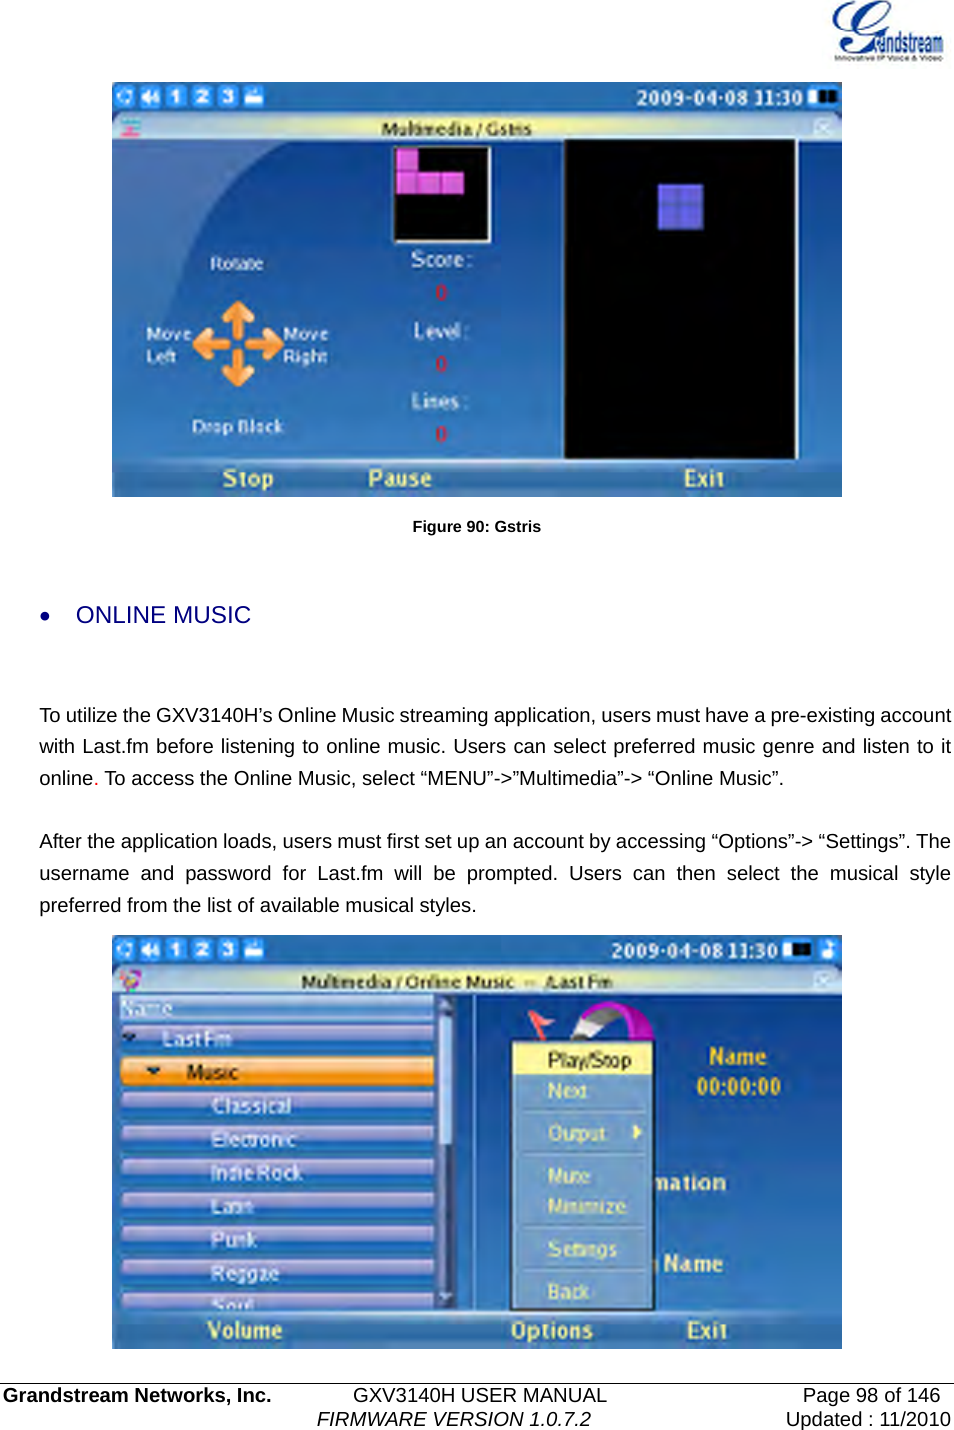   Grandstream Networks, Inc.        GXV3140H USER MANUAL                  Page 98 of 146                                FIRMWARE VERSION 1.0.7.2 Updated : 11/2010   Figure 90: Gstris  • ONLINE MUSIC  To utilize the GXV3140H’s Online Music streaming application, users must have a pre-existing account with Last.fm before listening to online music. Users can select preferred music genre and listen to it online. To access the Online Music, select “MENU”-&gt;”Multimedia”-&gt; “Online Music”.     After the application loads, users must first set up an account by accessing “Options”-&gt; “Settings”. The username and password for Last.fm will be prompted. Users can then select the musical style preferred from the list of available musical styles.    